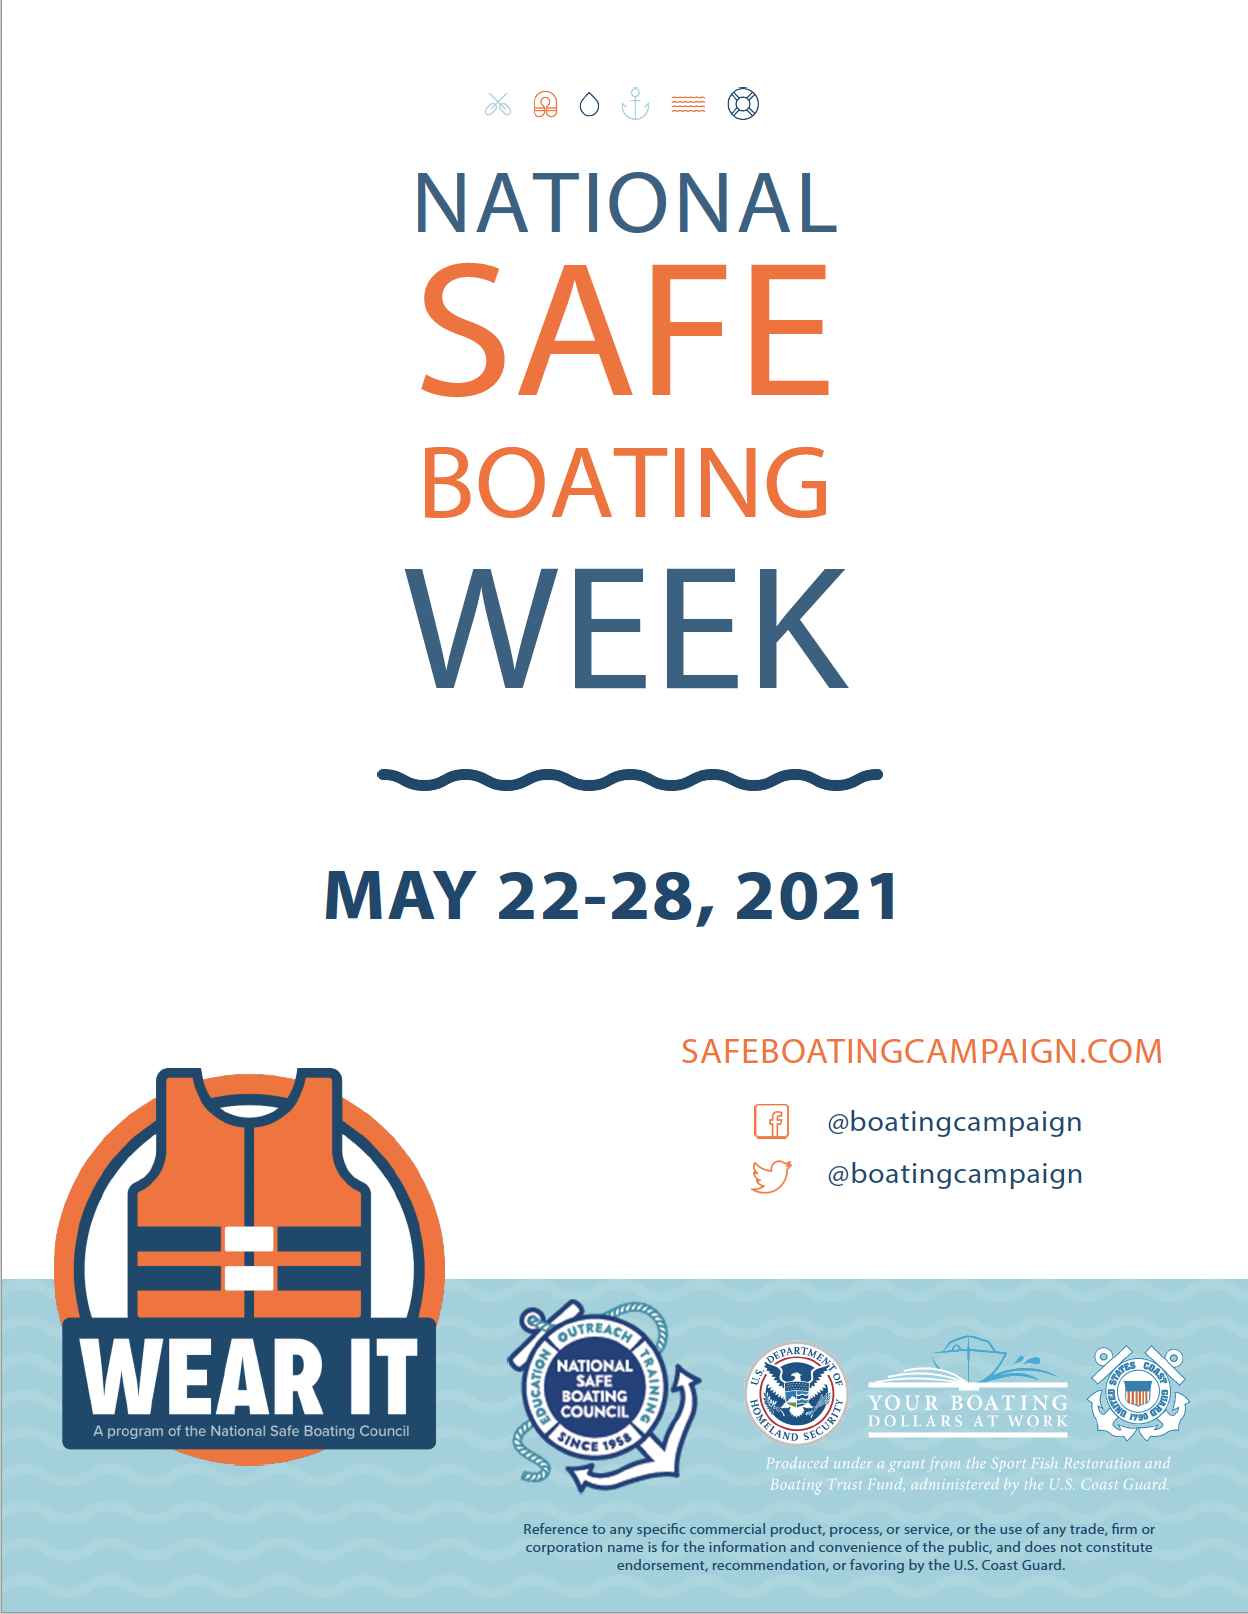 National Safe Boating Week Campaign Graphic